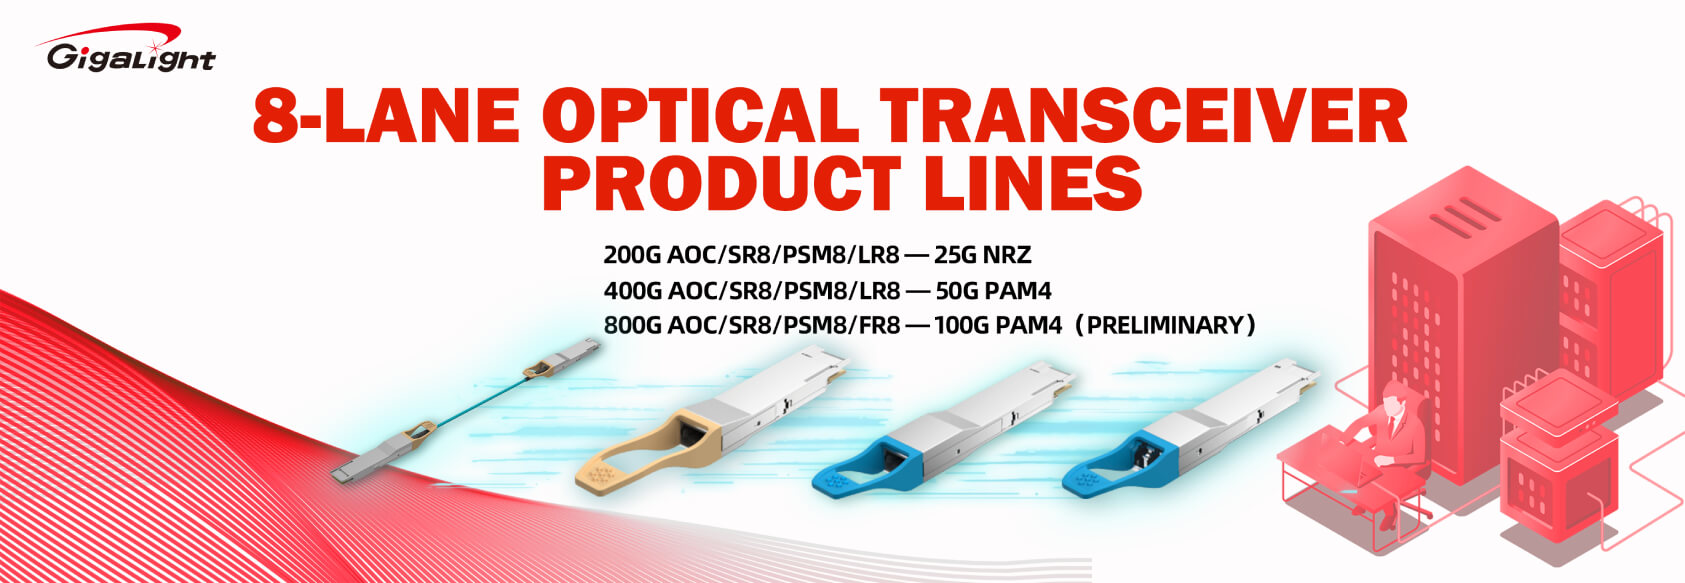 8-lane Optical Transceiver Product